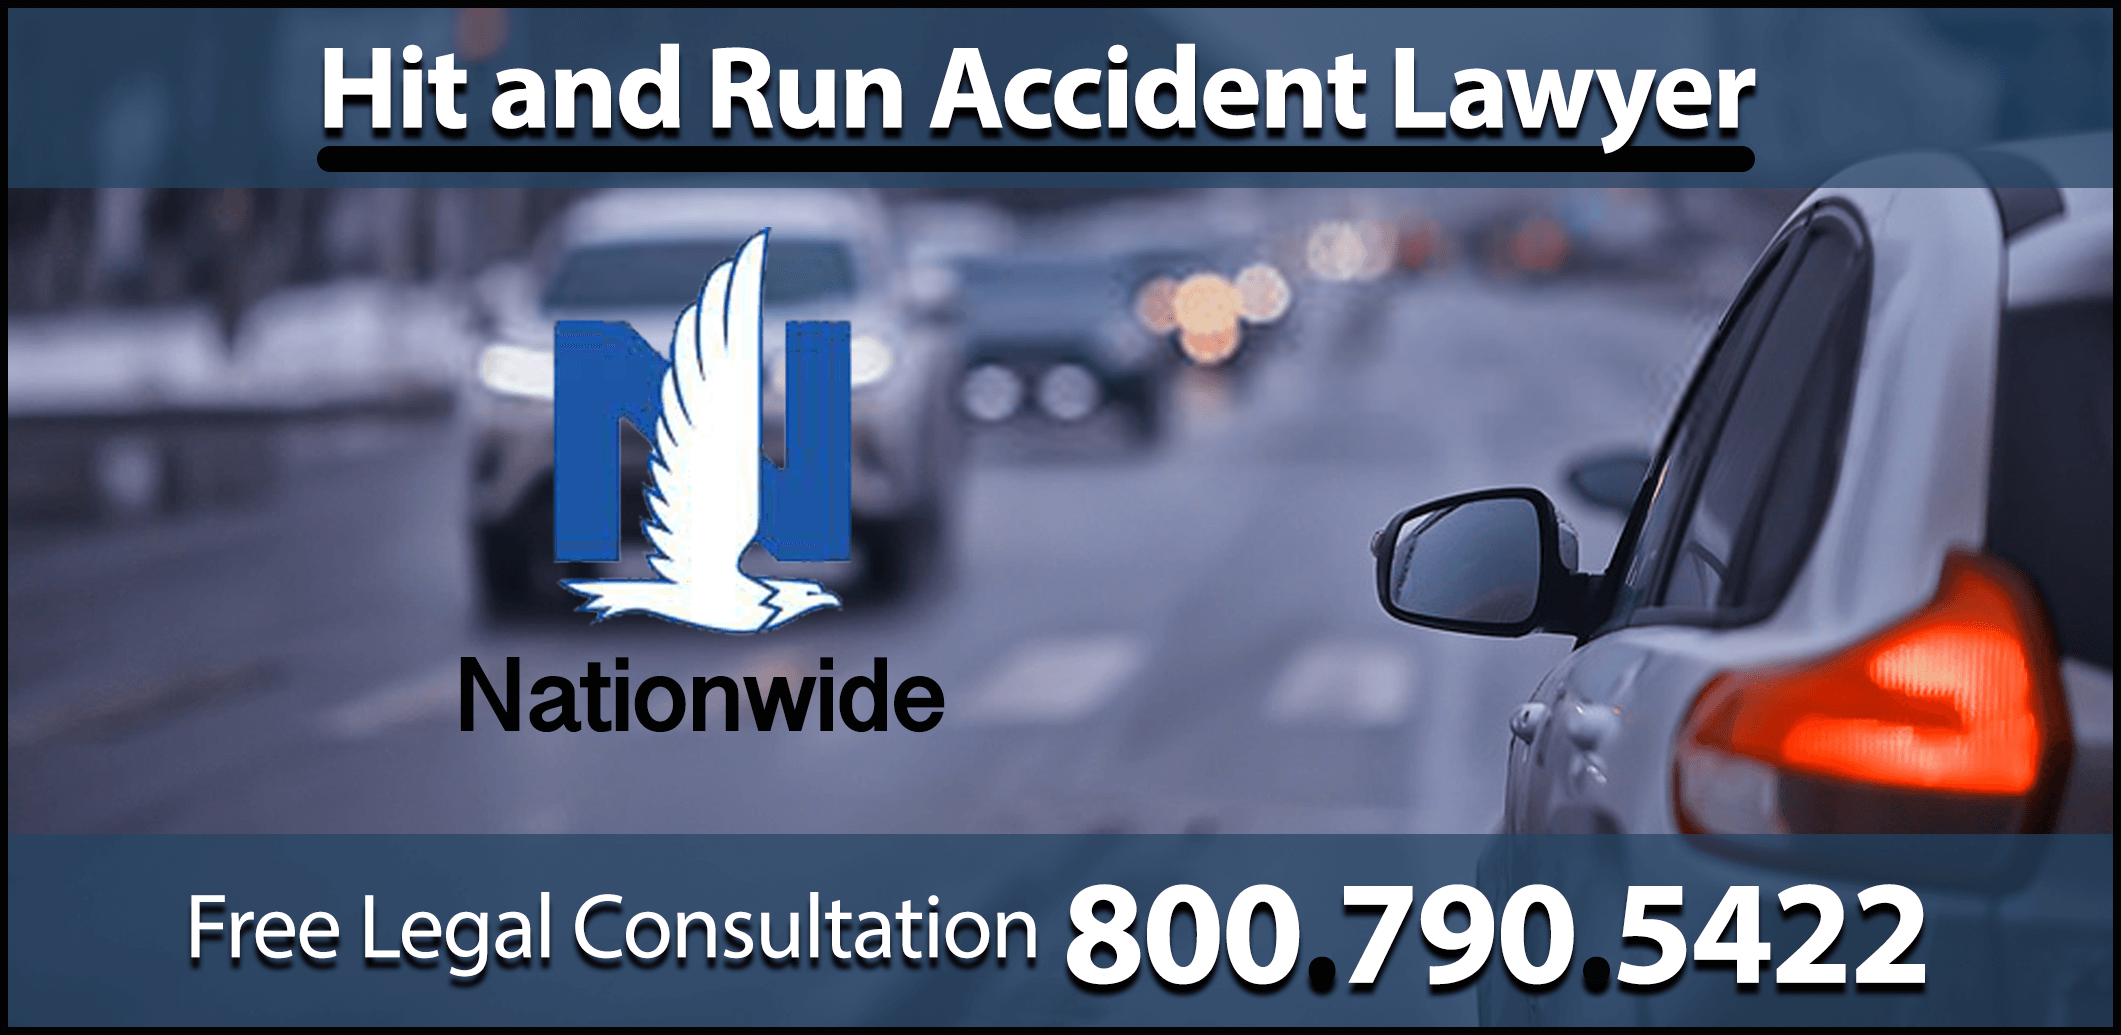 nationwide insurance hit and run accident lawyer broken bone fracture dislocation medical bill compensation claim sue